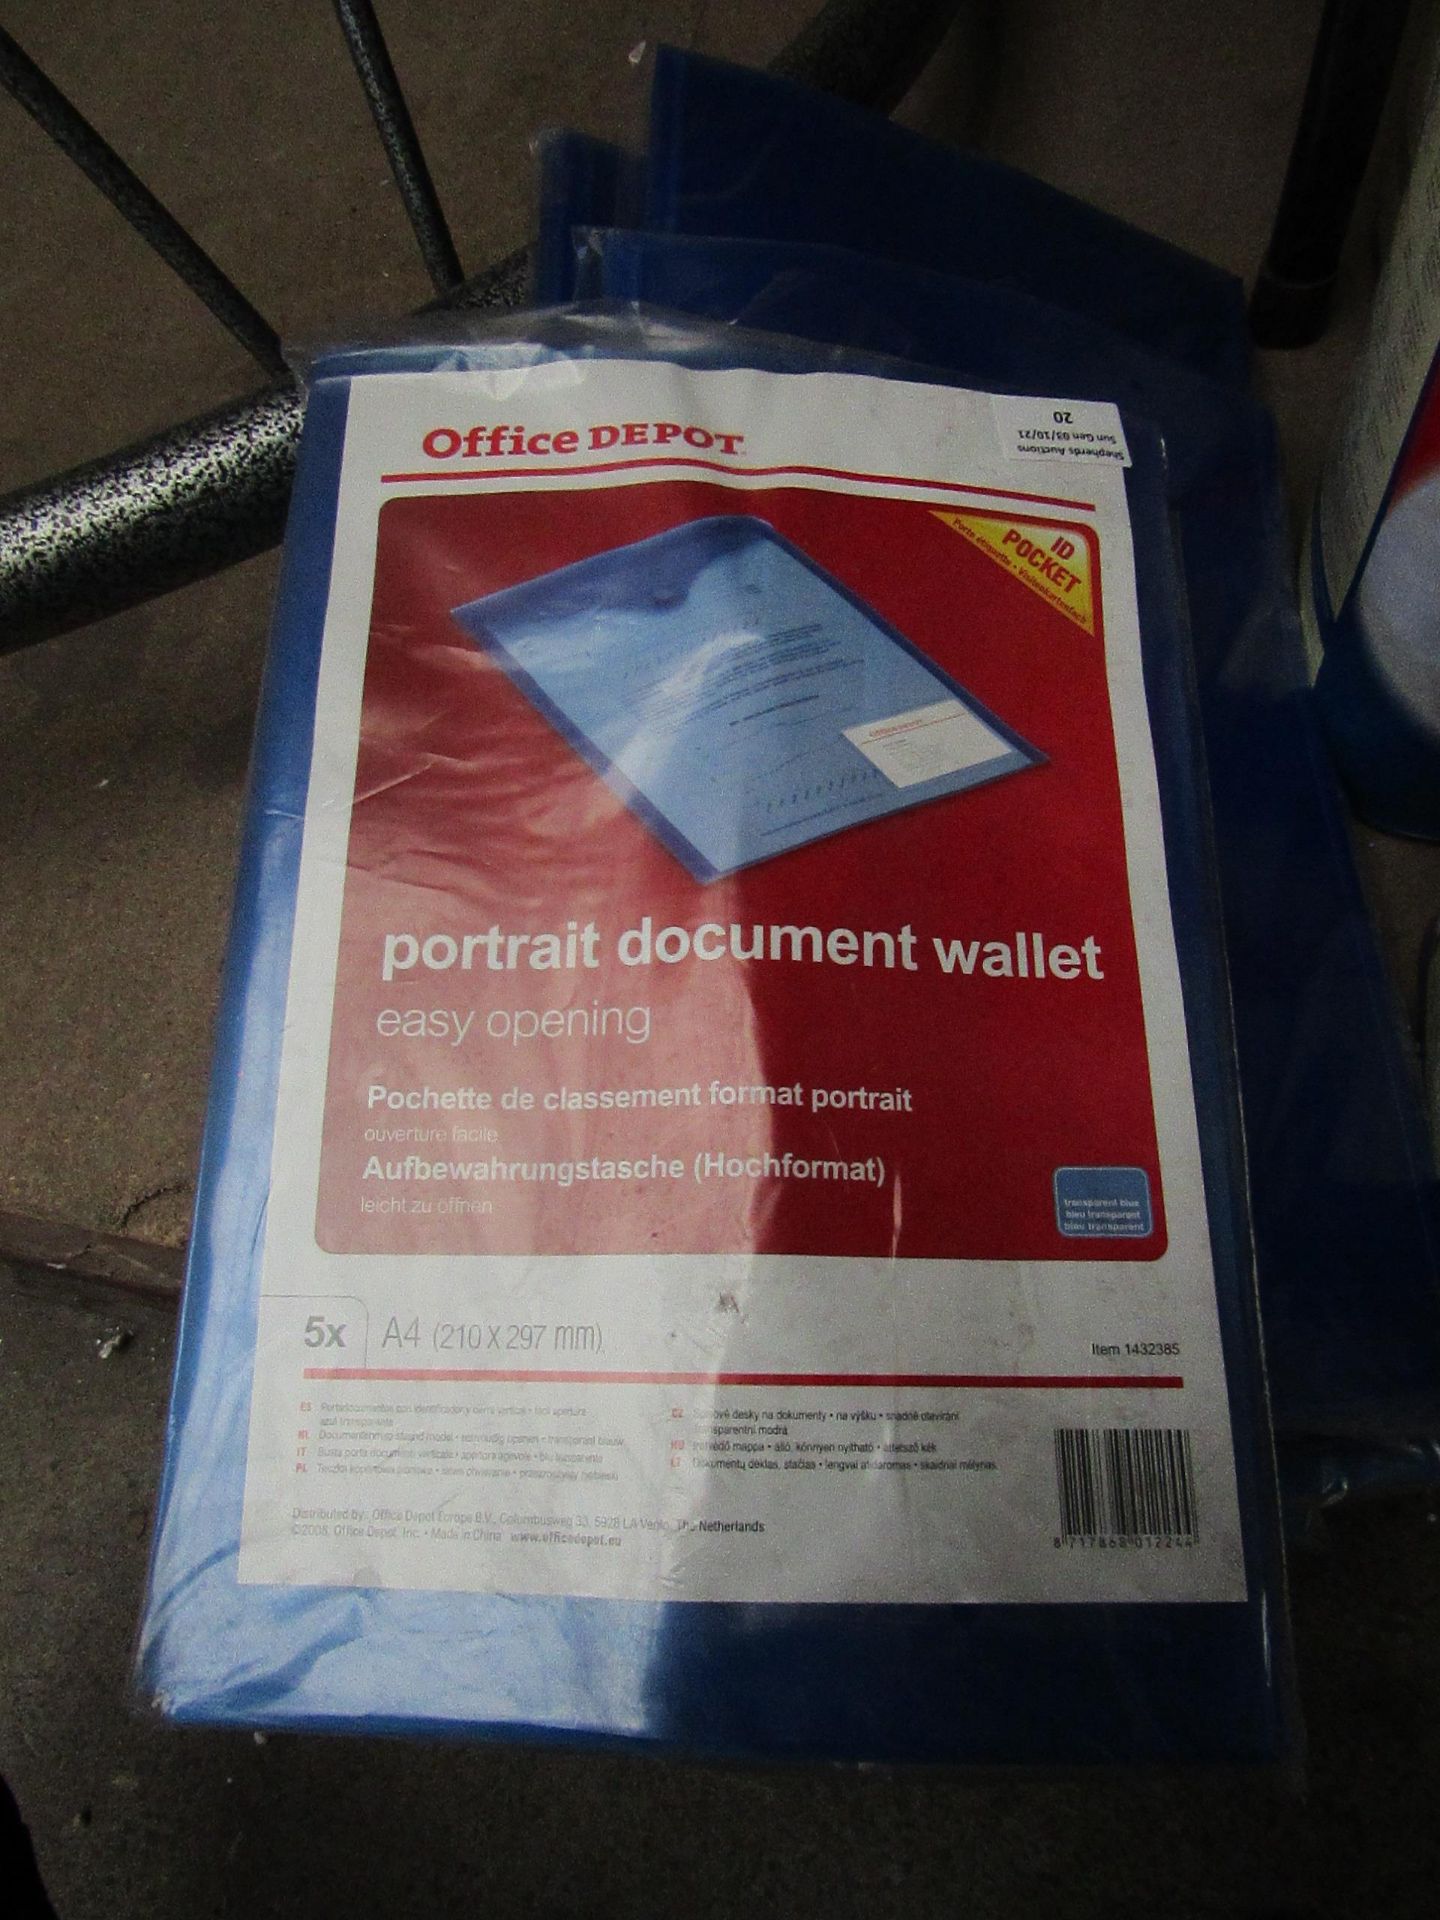 9x Packs of 5x Office Depot Portrait Document Wallet - Looks Unused & Packaged.